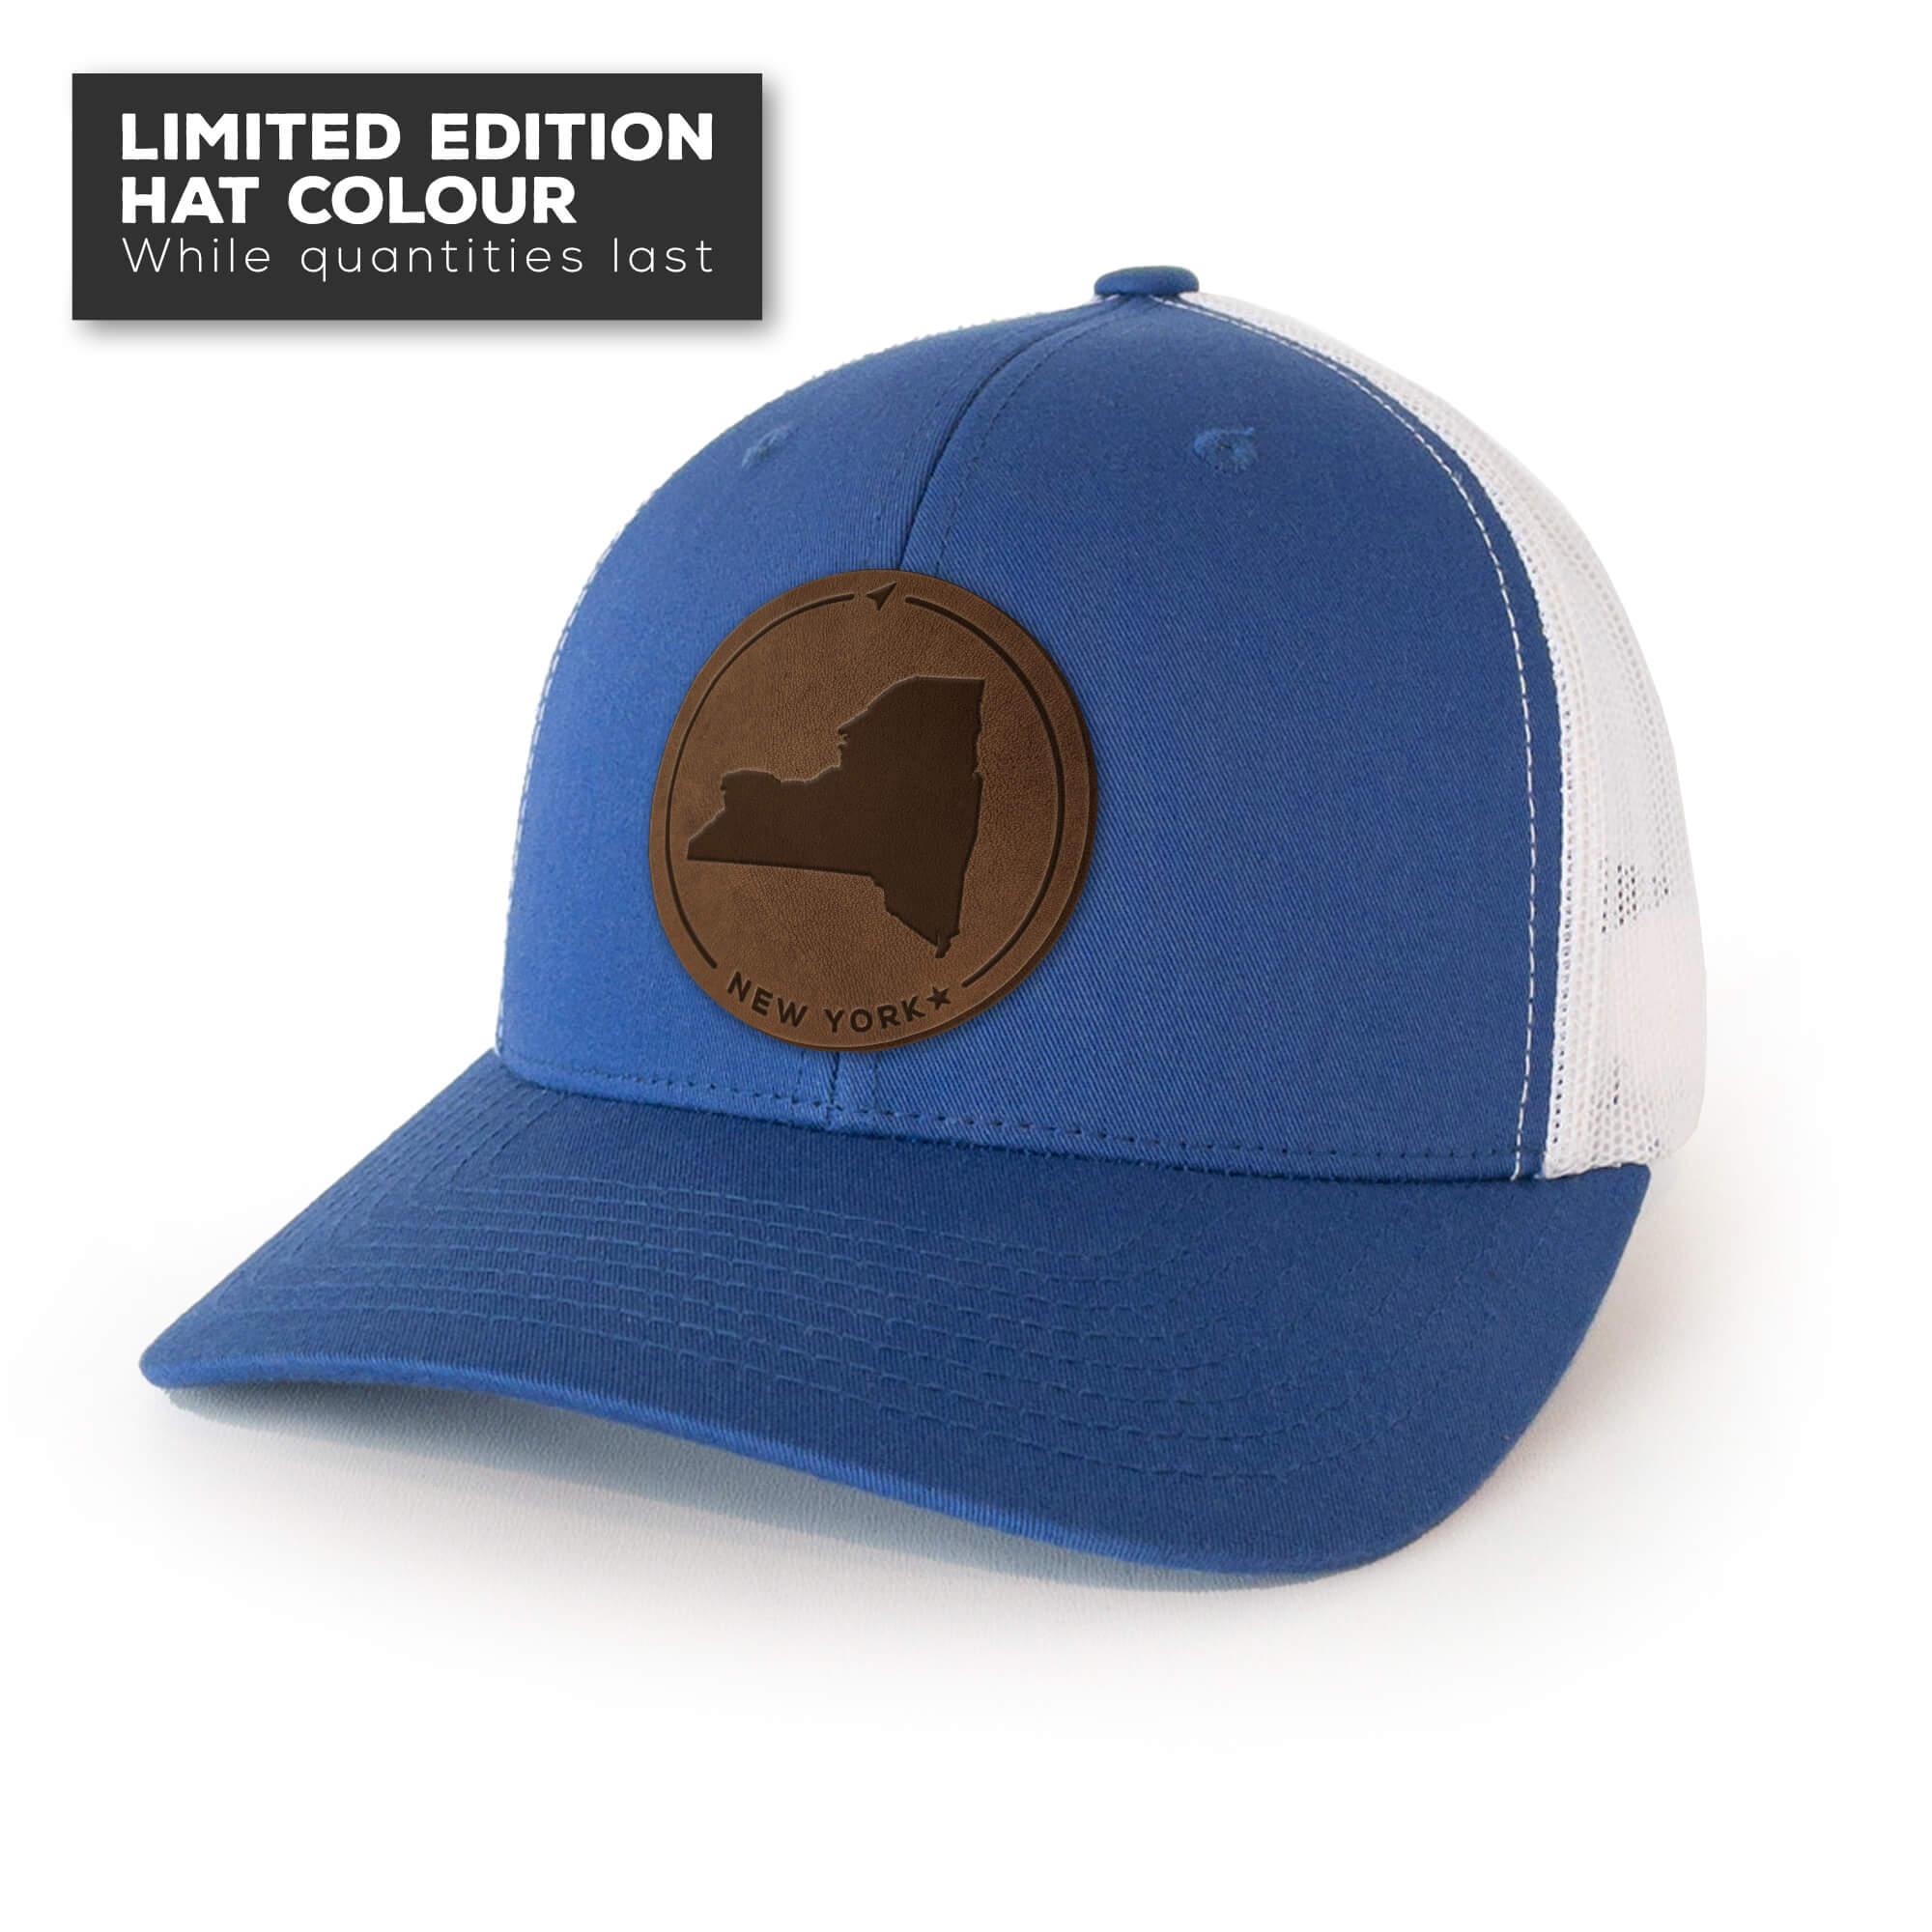 Royal Blue trucker hat with full-grain leather patch of New York